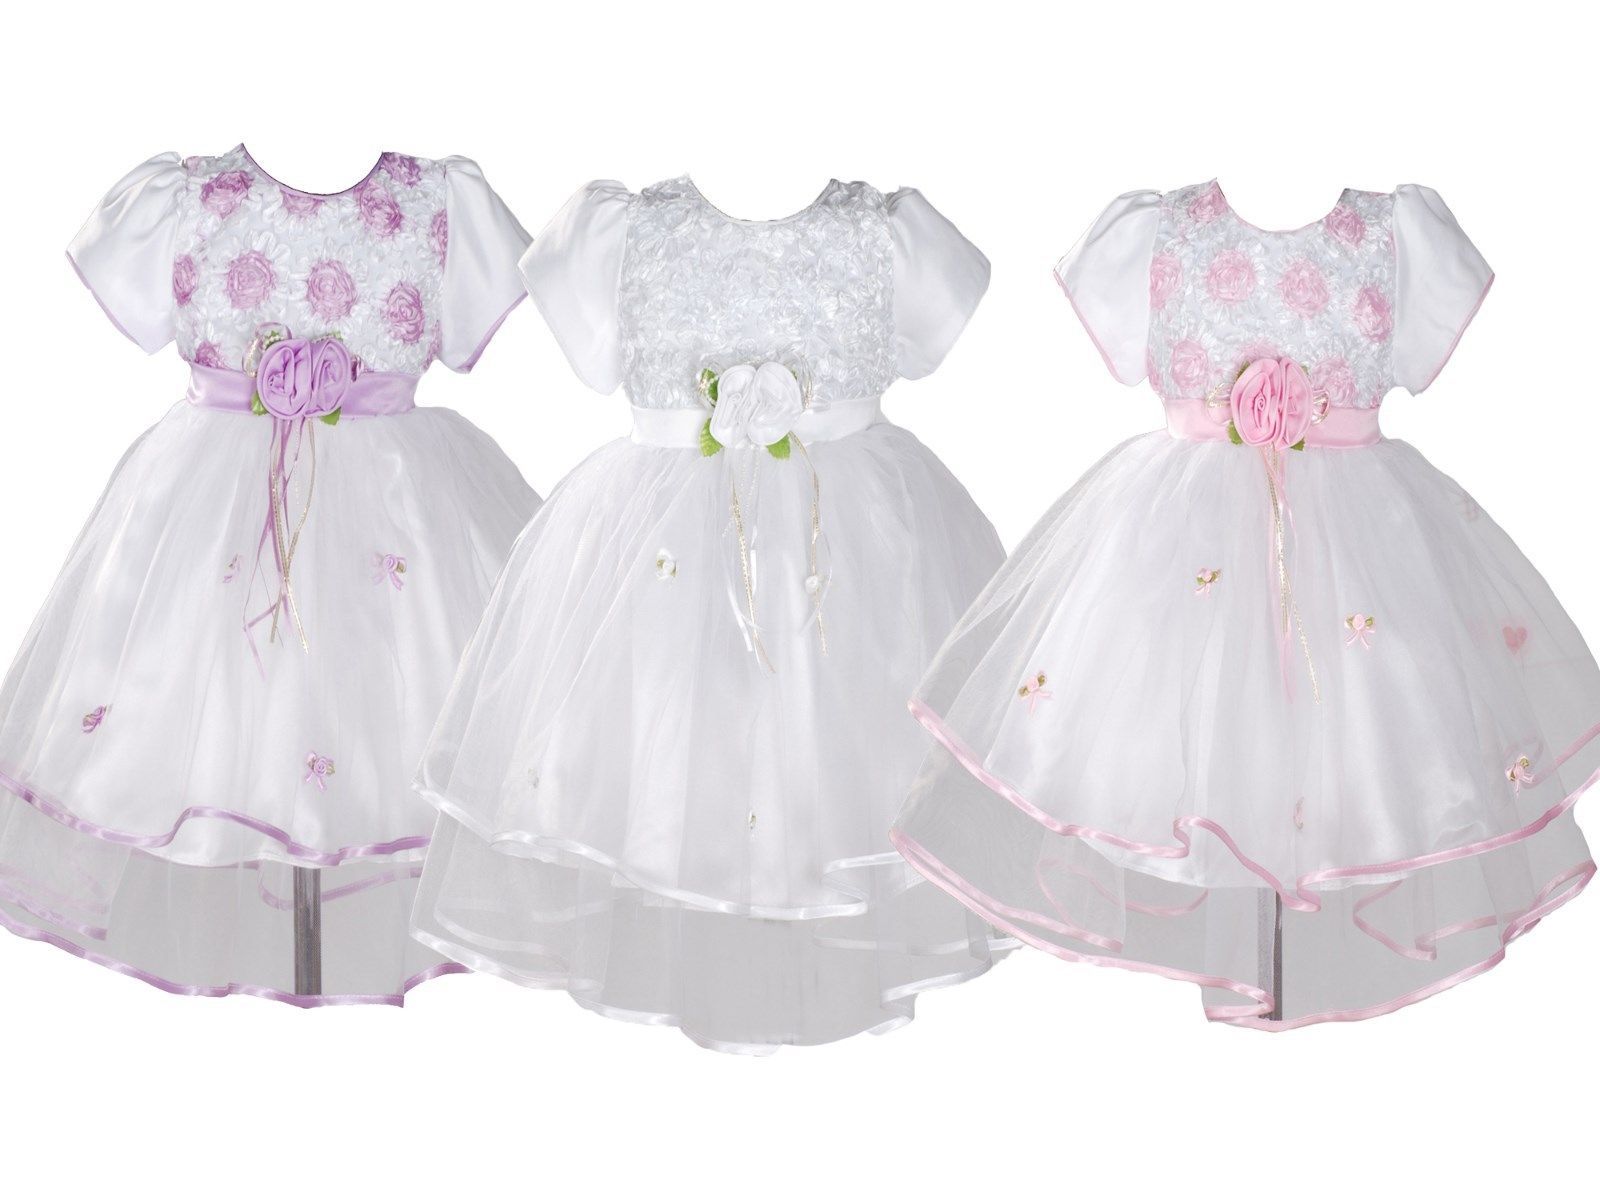 Baby Girls Christening Party Dress Pink Lilac White 0 3 6 9 12 18 Months - $21.48